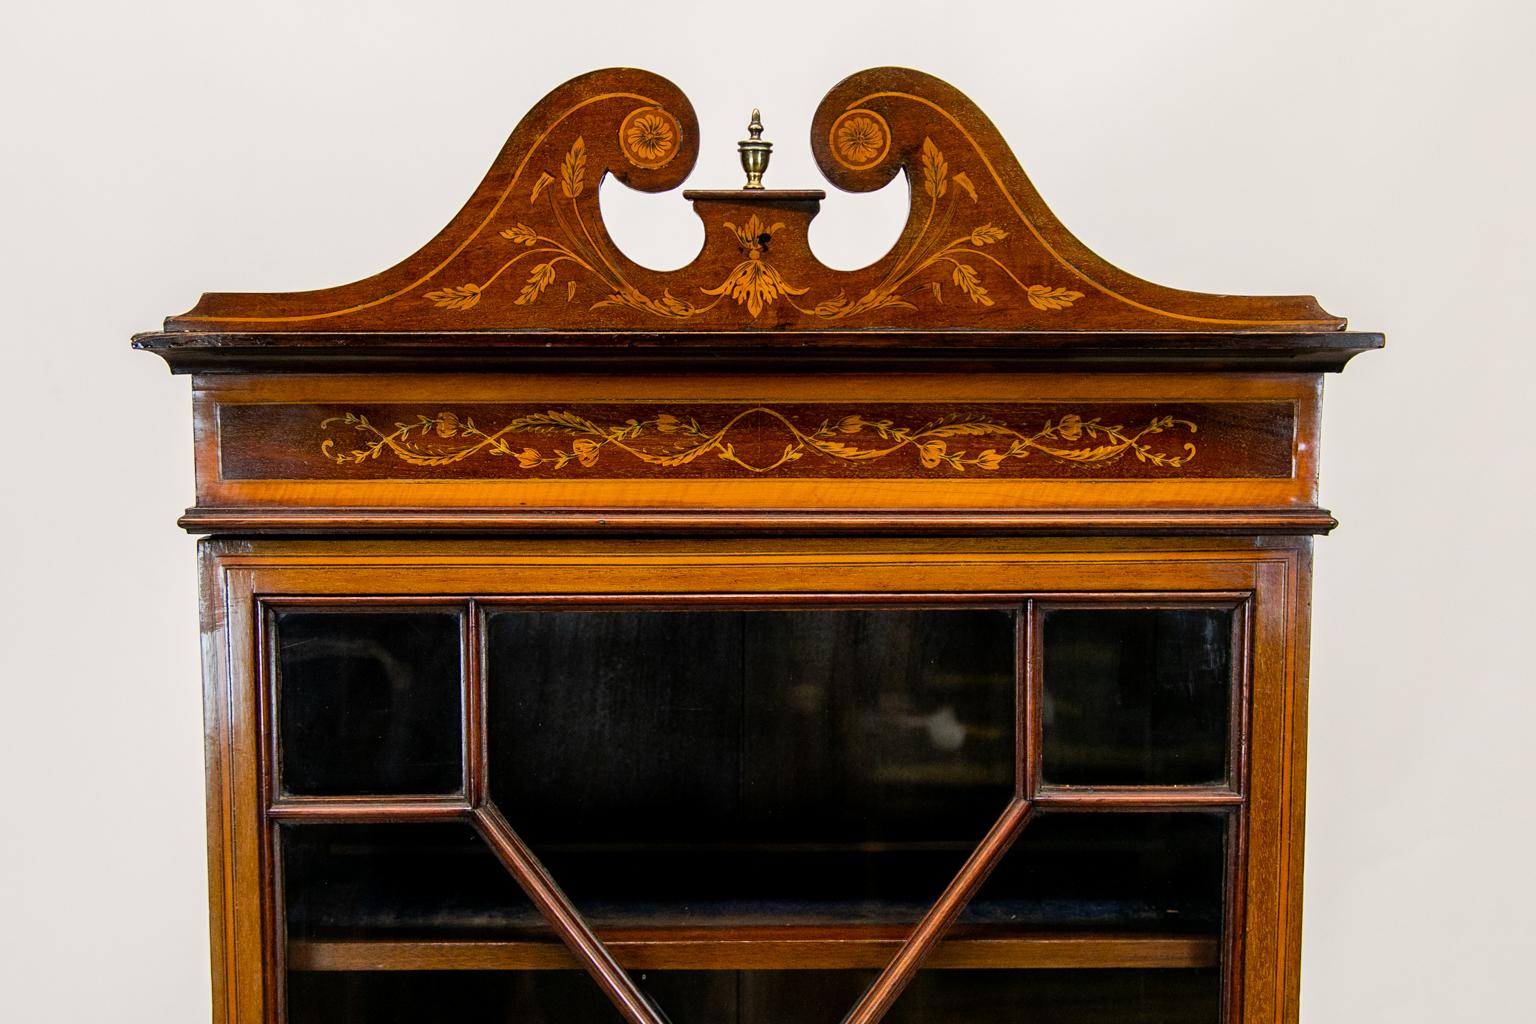 This English inlaid bookcase has an eight pane astragal door which is banded with satinwood and ebony inlay. It has the original working lock and key. The cornice has a broken arch pediment inlaid with floral arabesques with a small beaded brass